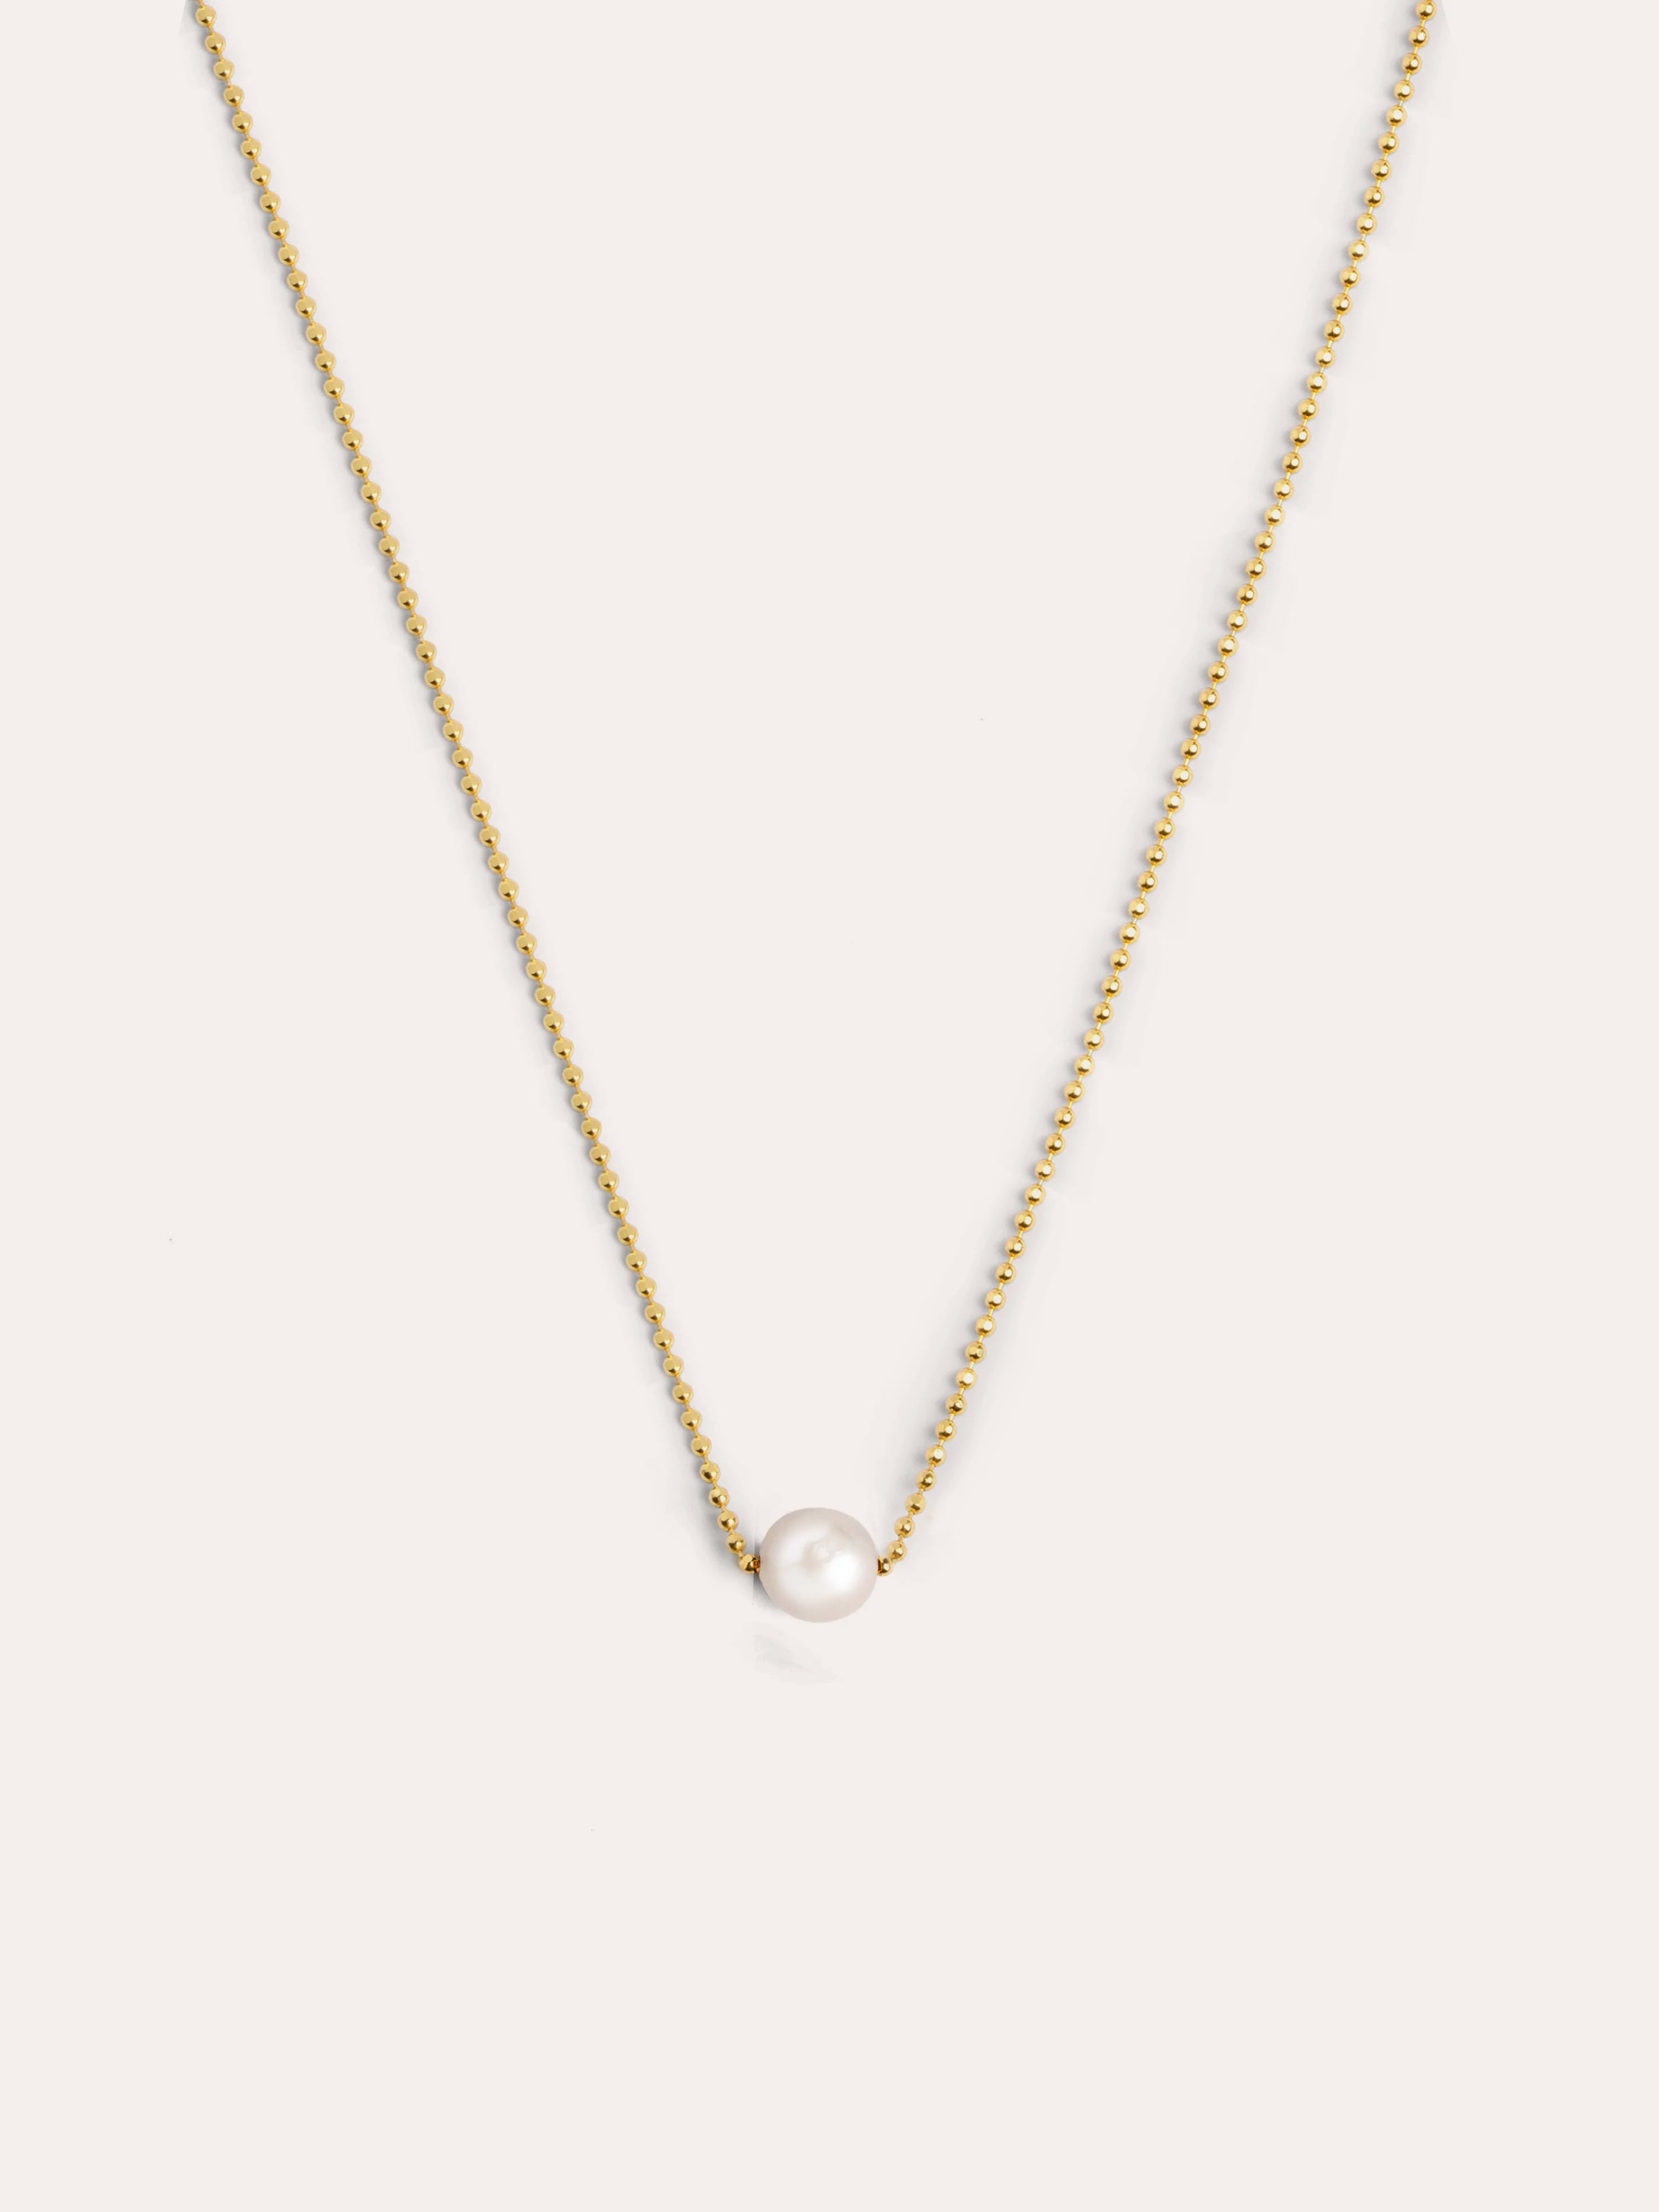 Single Pearl Gold Necklace